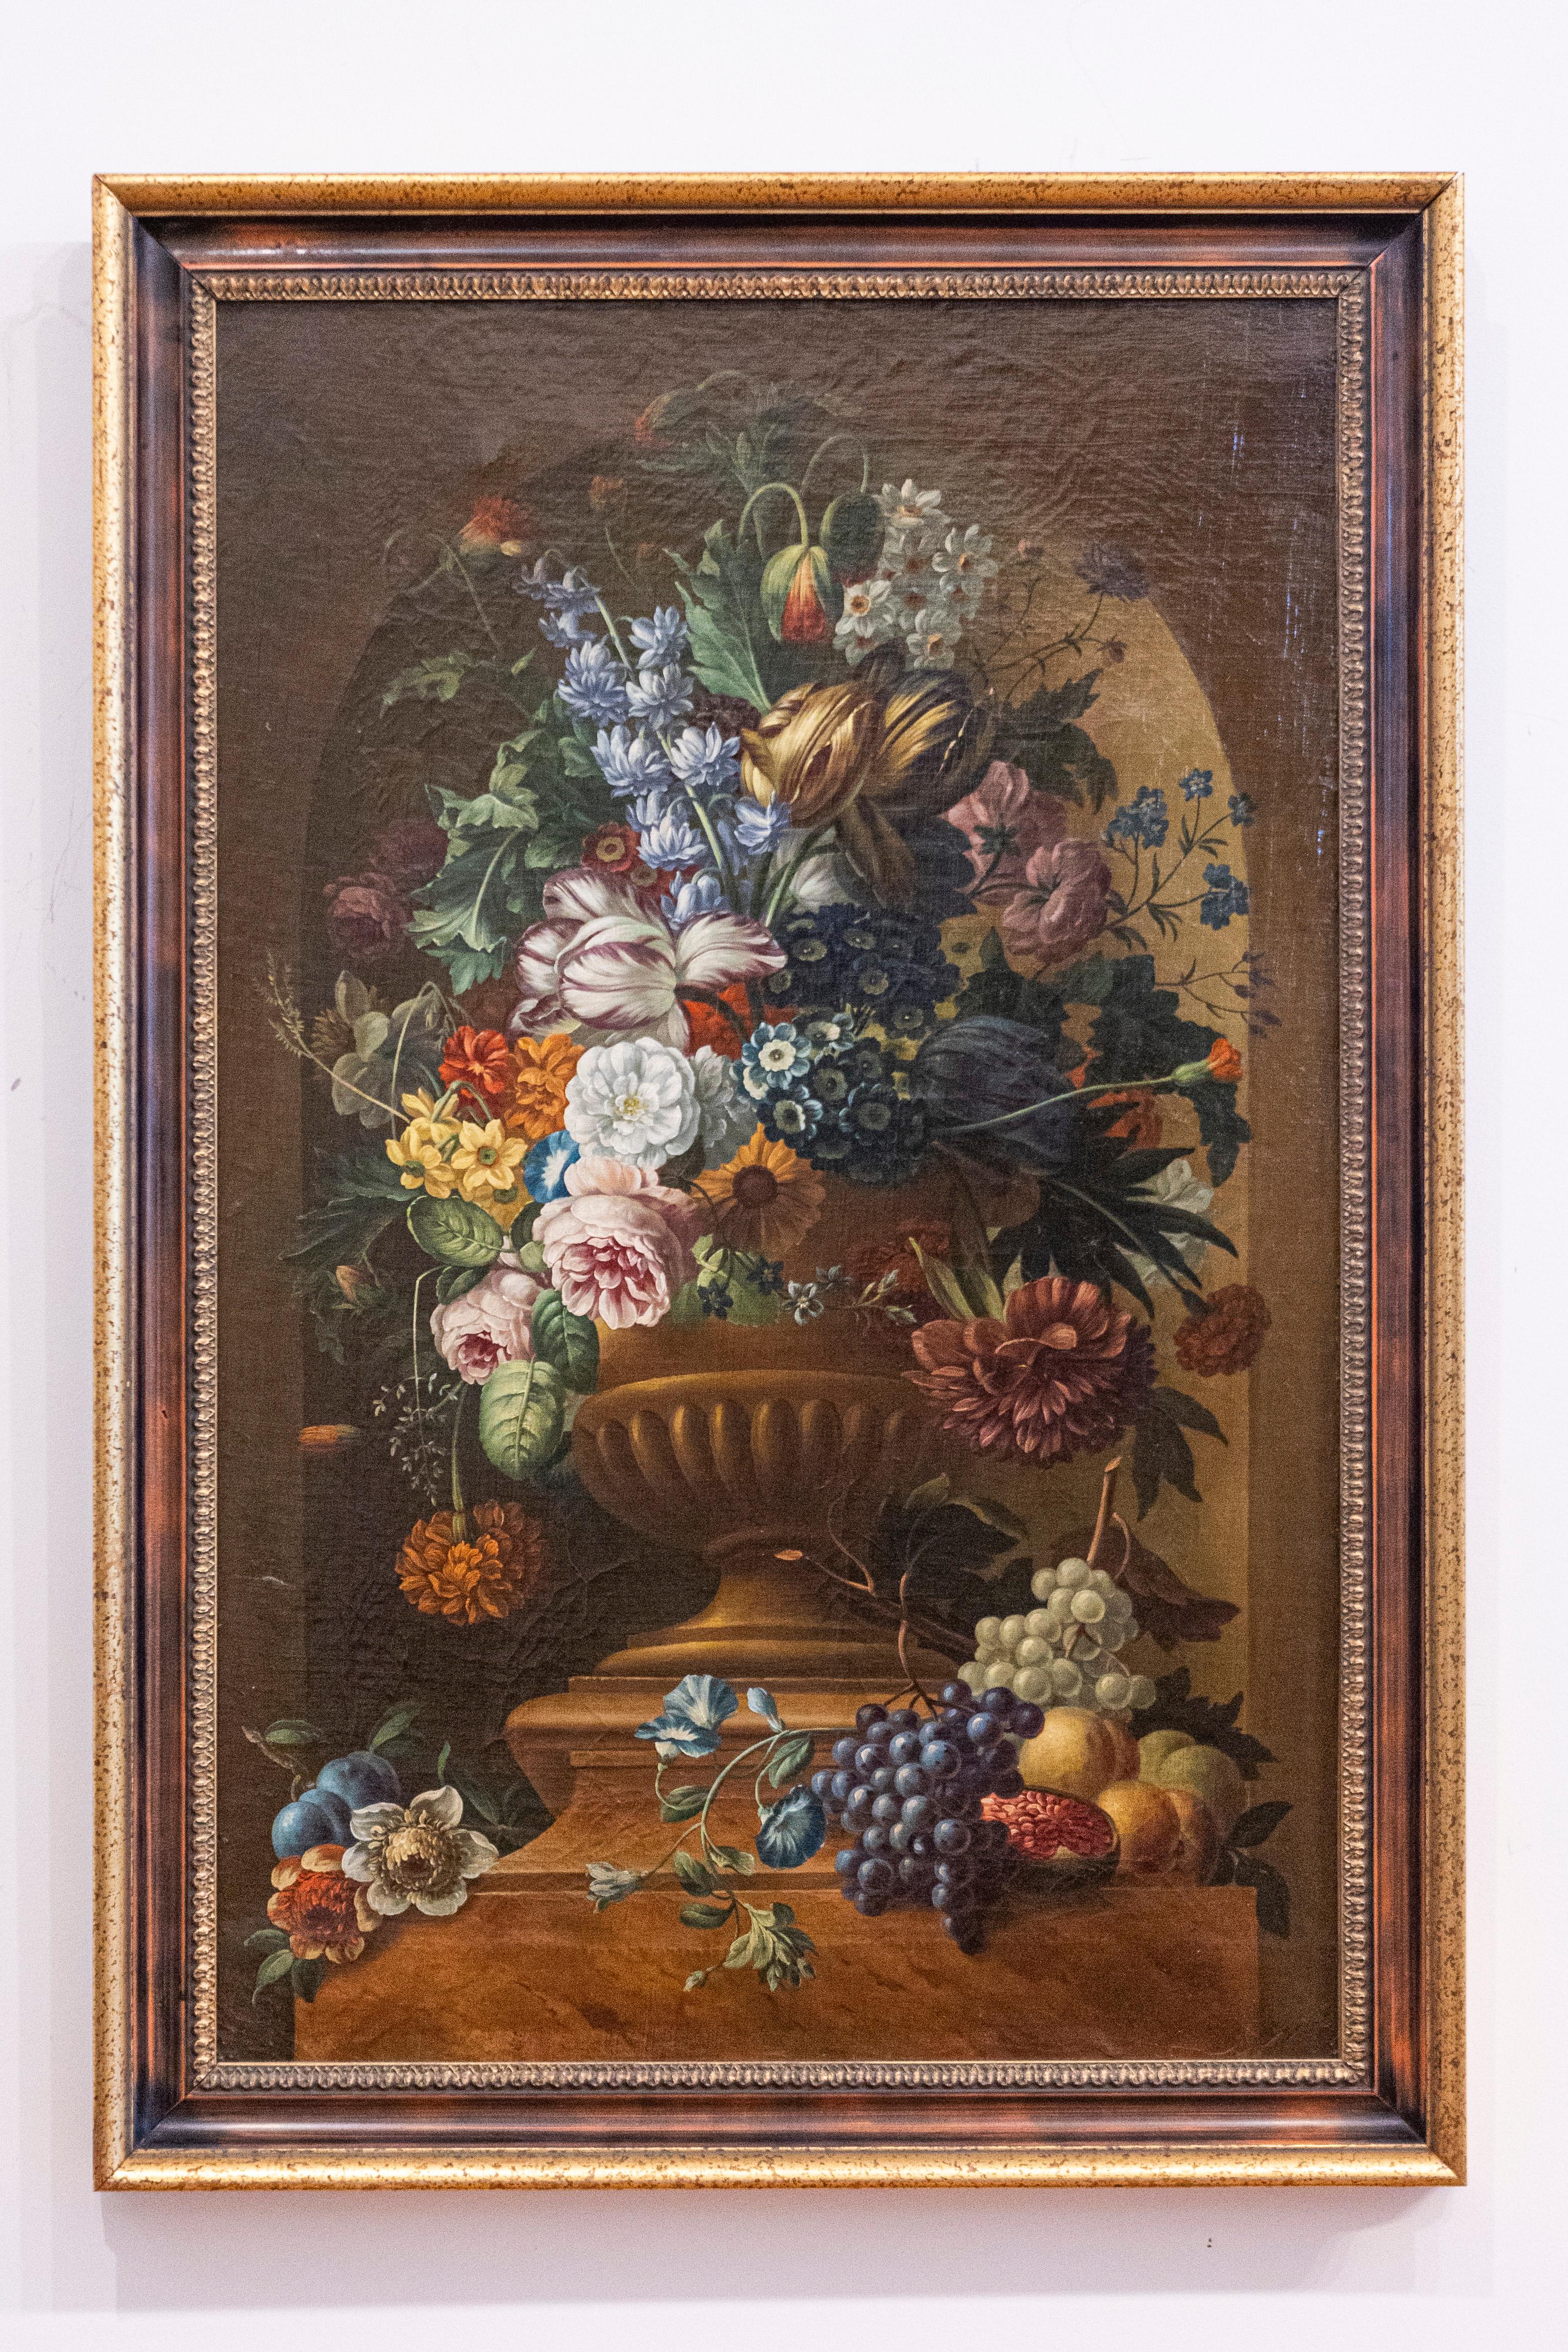 A Swedish still life floral oil on canvas painting from the late 18th century, painted in the manner of Dutch artist Paulus Theodorus van Brussel. This exquisite Swedish floral painting features a lush bouquet of flowers, displayed inside a